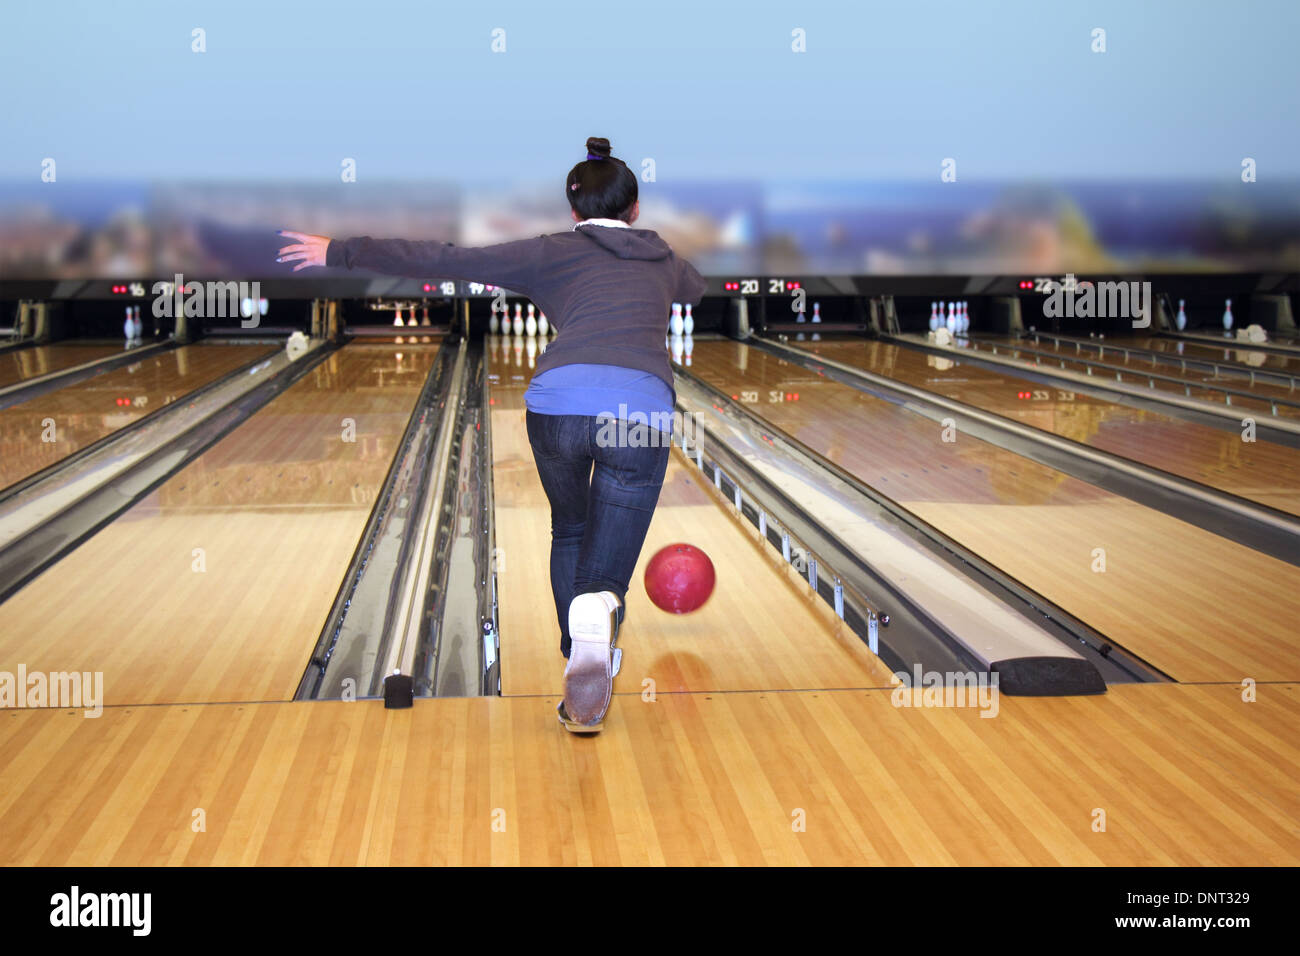 Young girl playing bowling Stock Photo